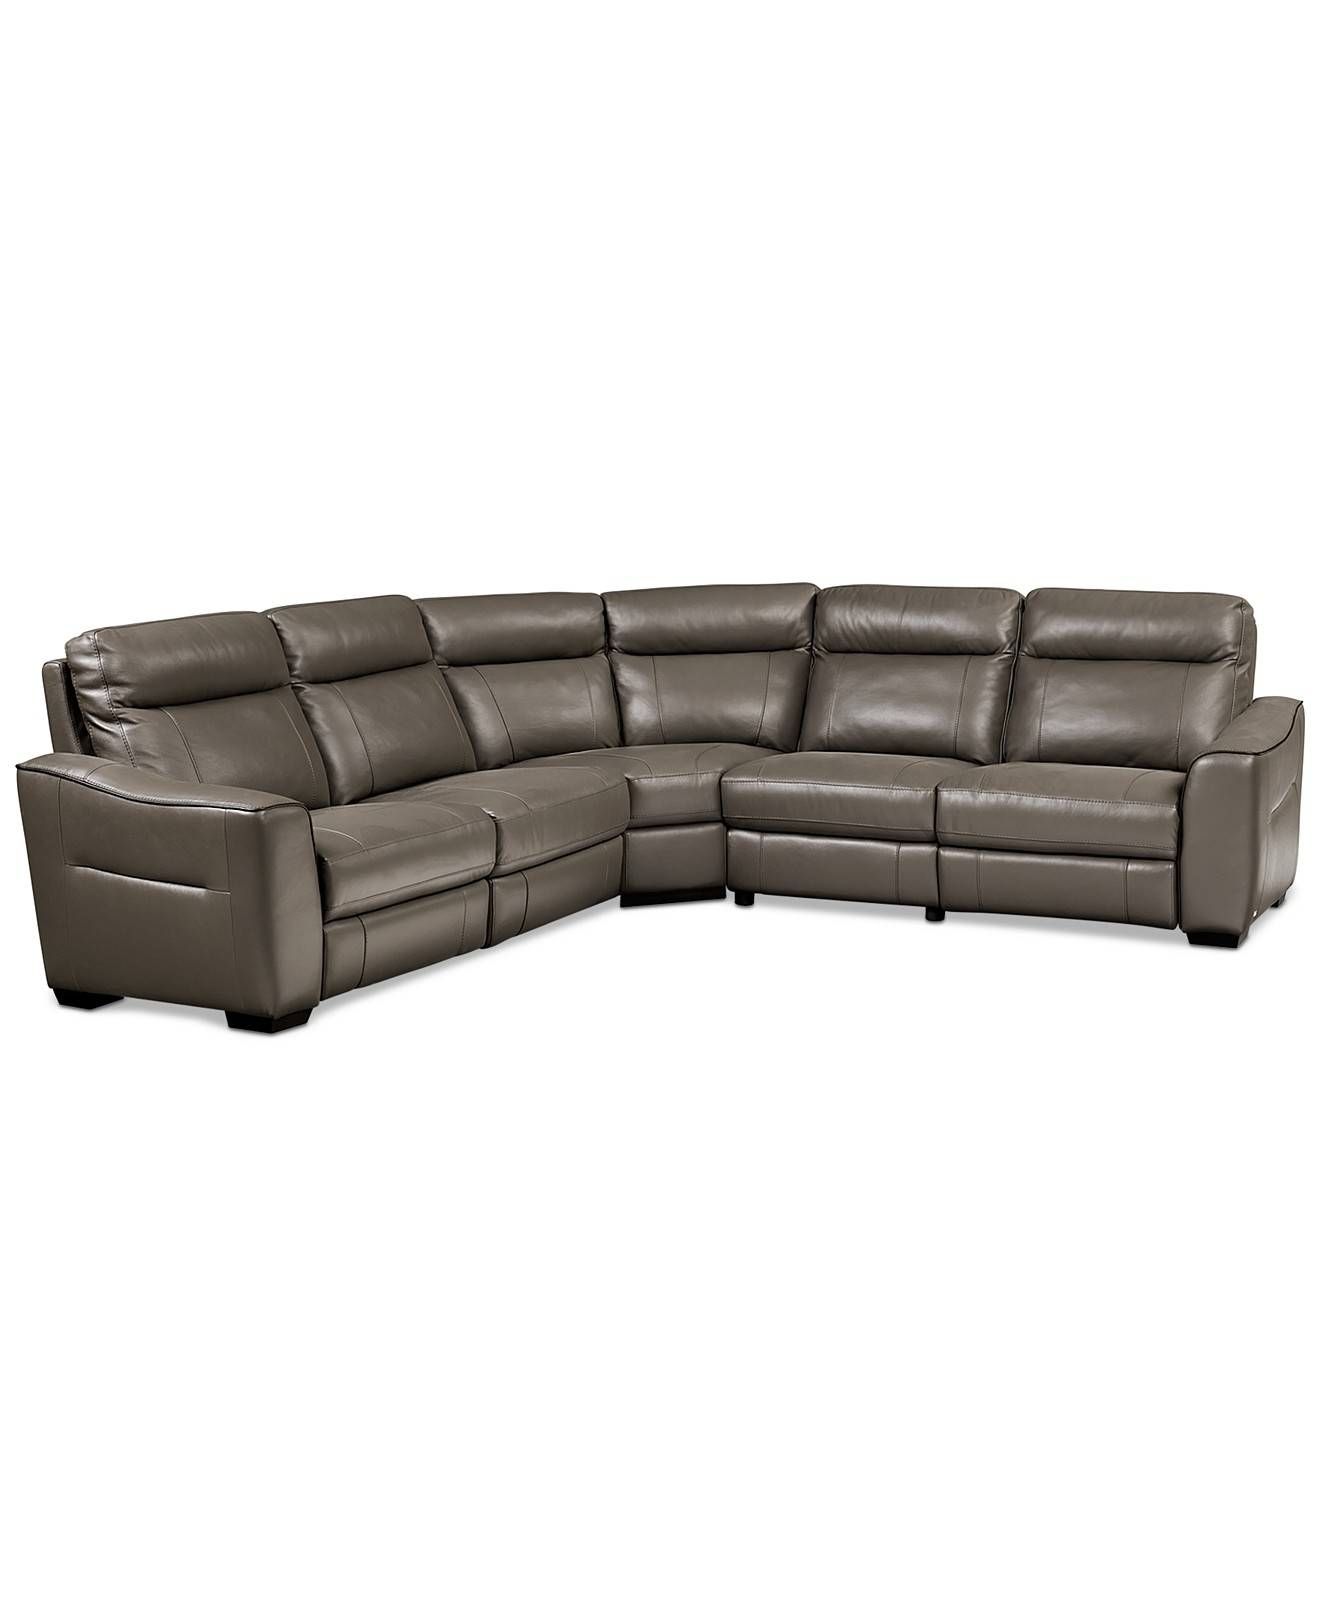 Curved Sectional Sofas At Macys | Tehranmix Decoration Throughout Macys Leather Sectional Sofa (View 20 of 25)